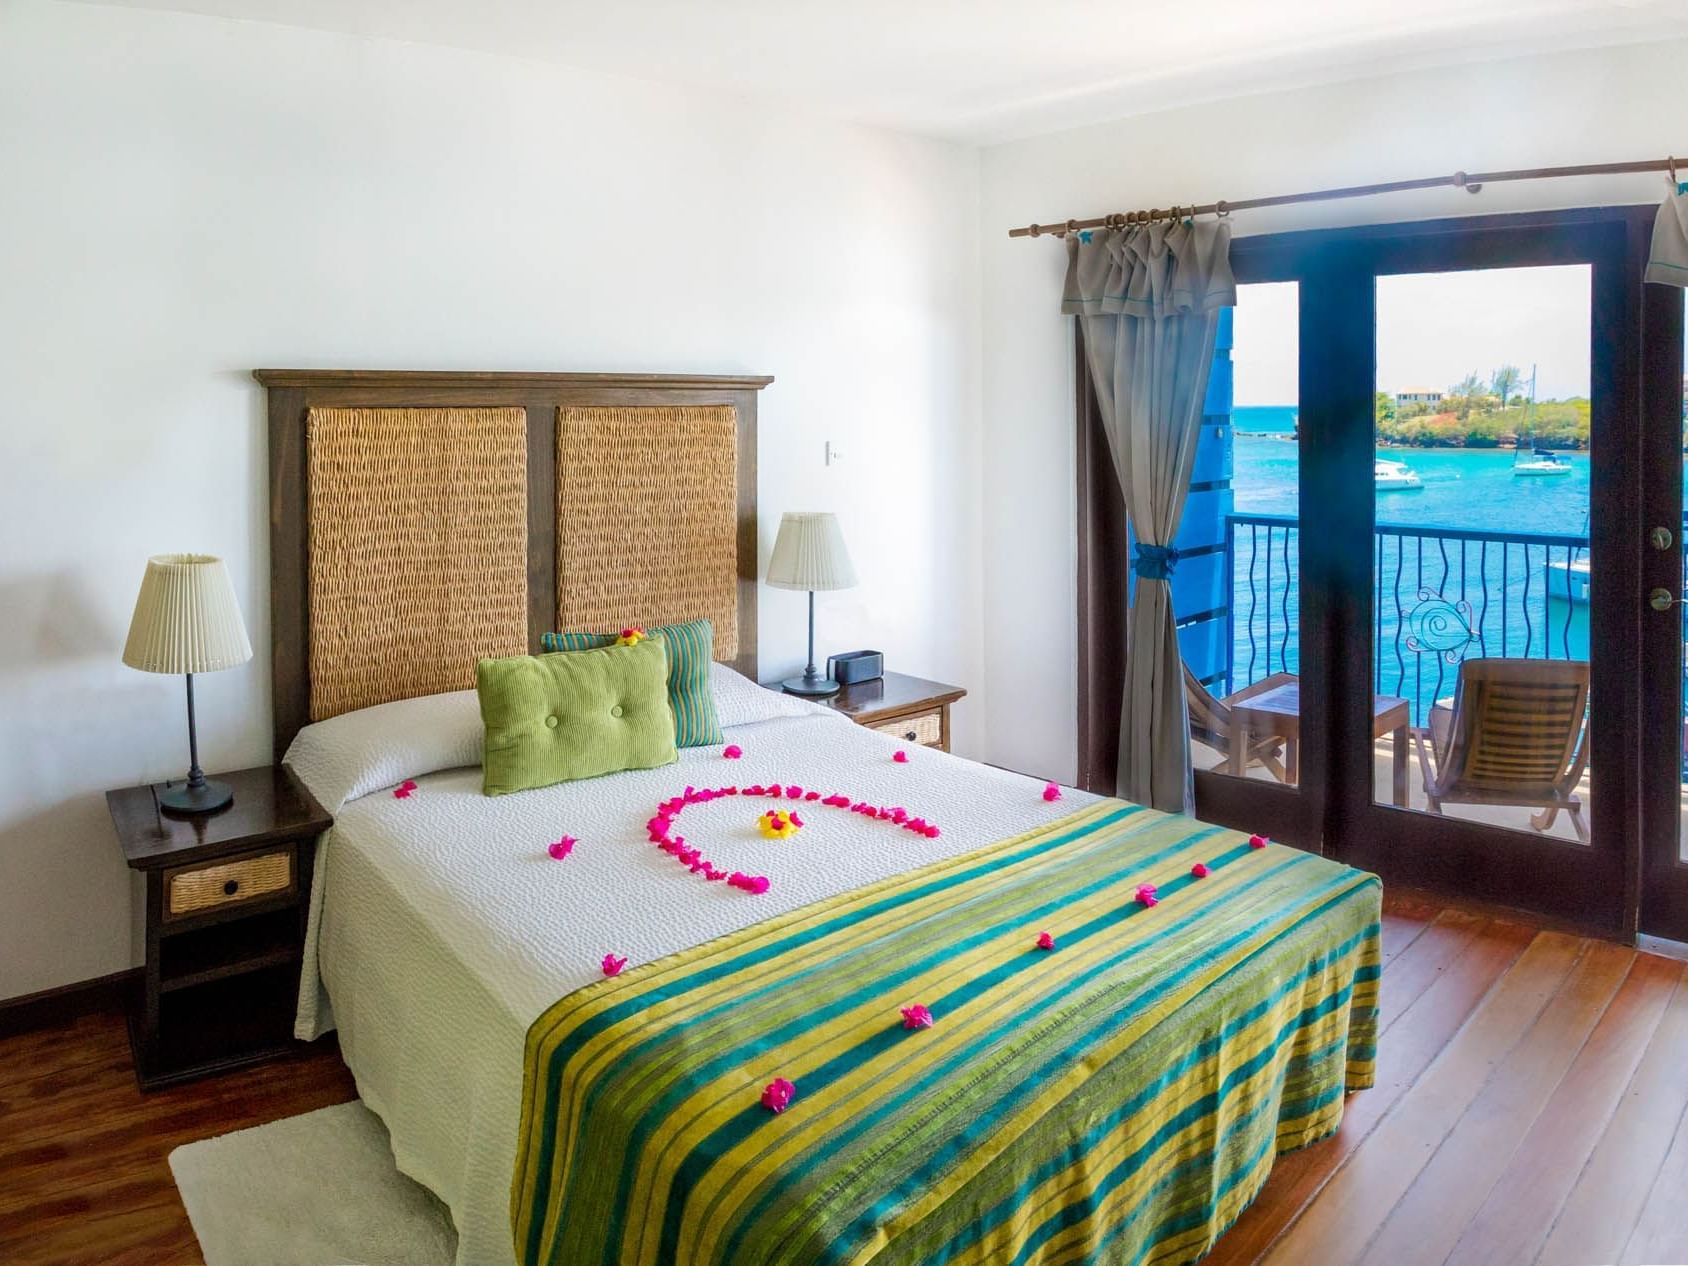 Interior of the Water Front Suites at True Blue Bay Hotel